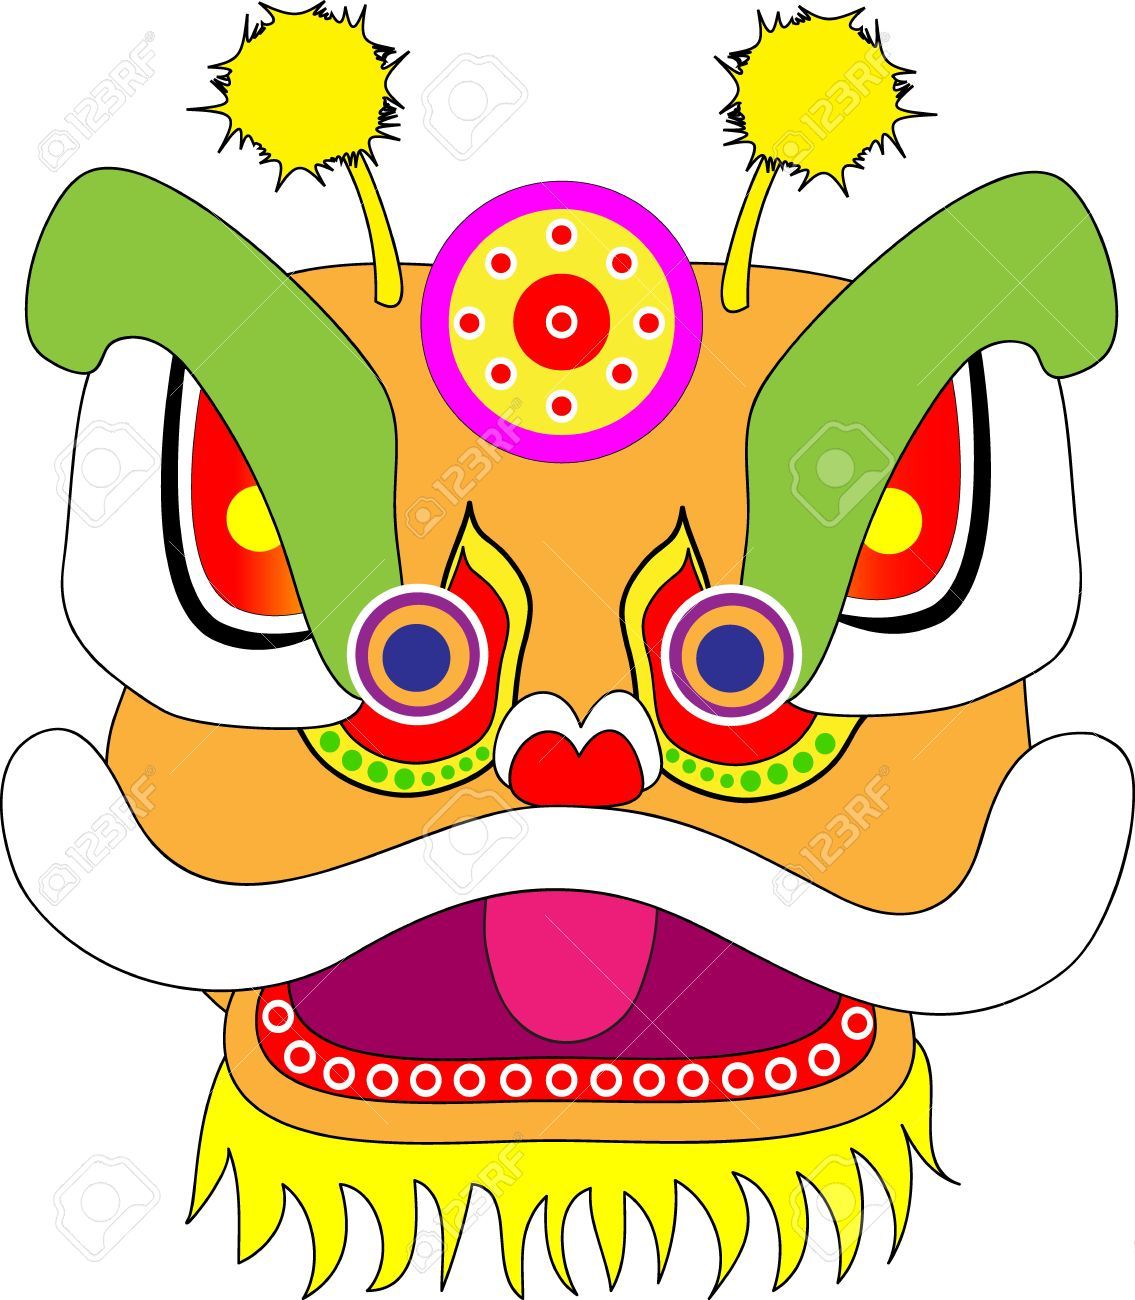 Masks clipart chinese.